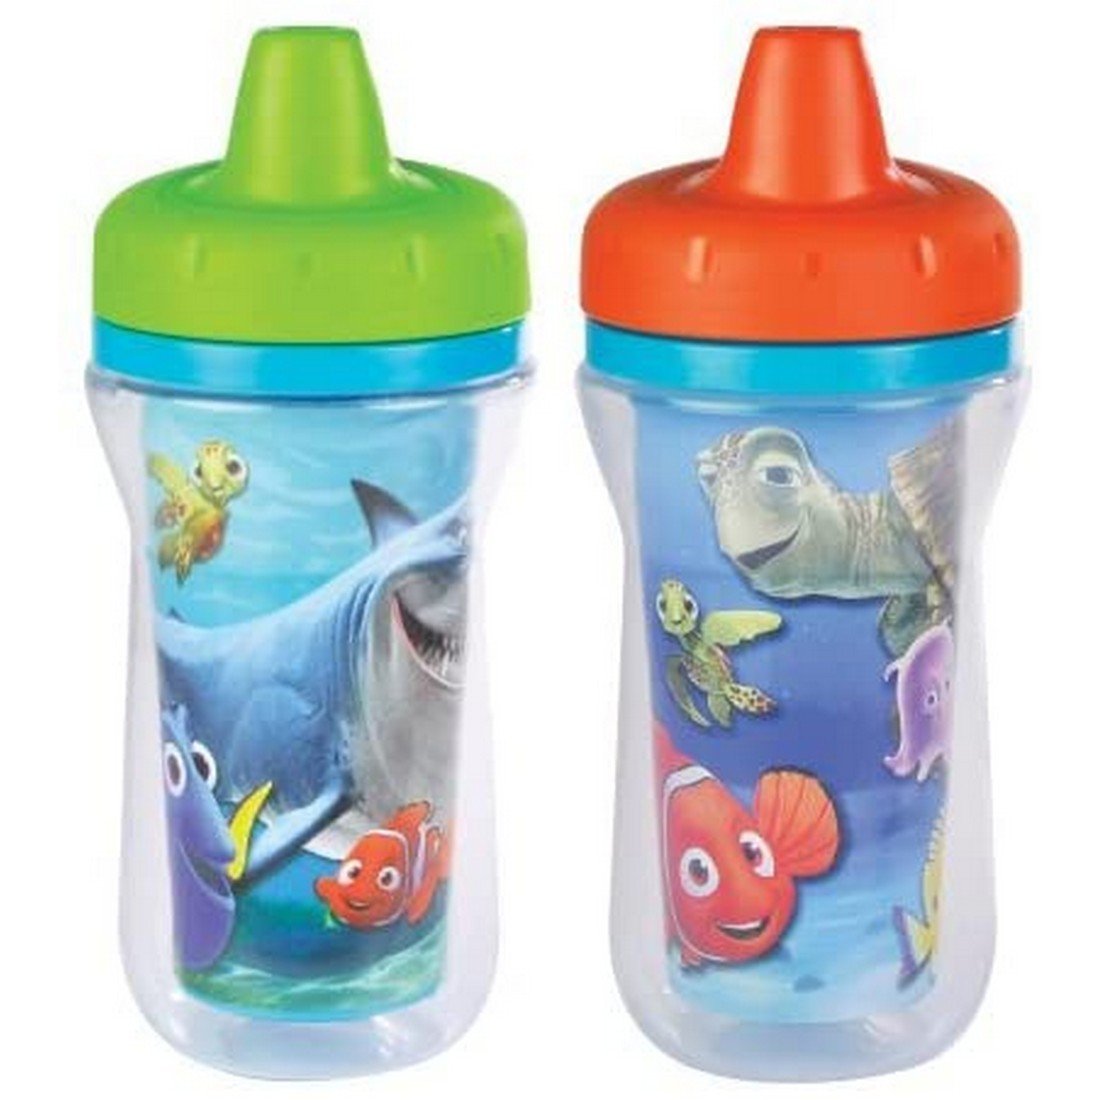 The First Years Ins Sippy Cup 2Pk - Green & Red - 29341AR